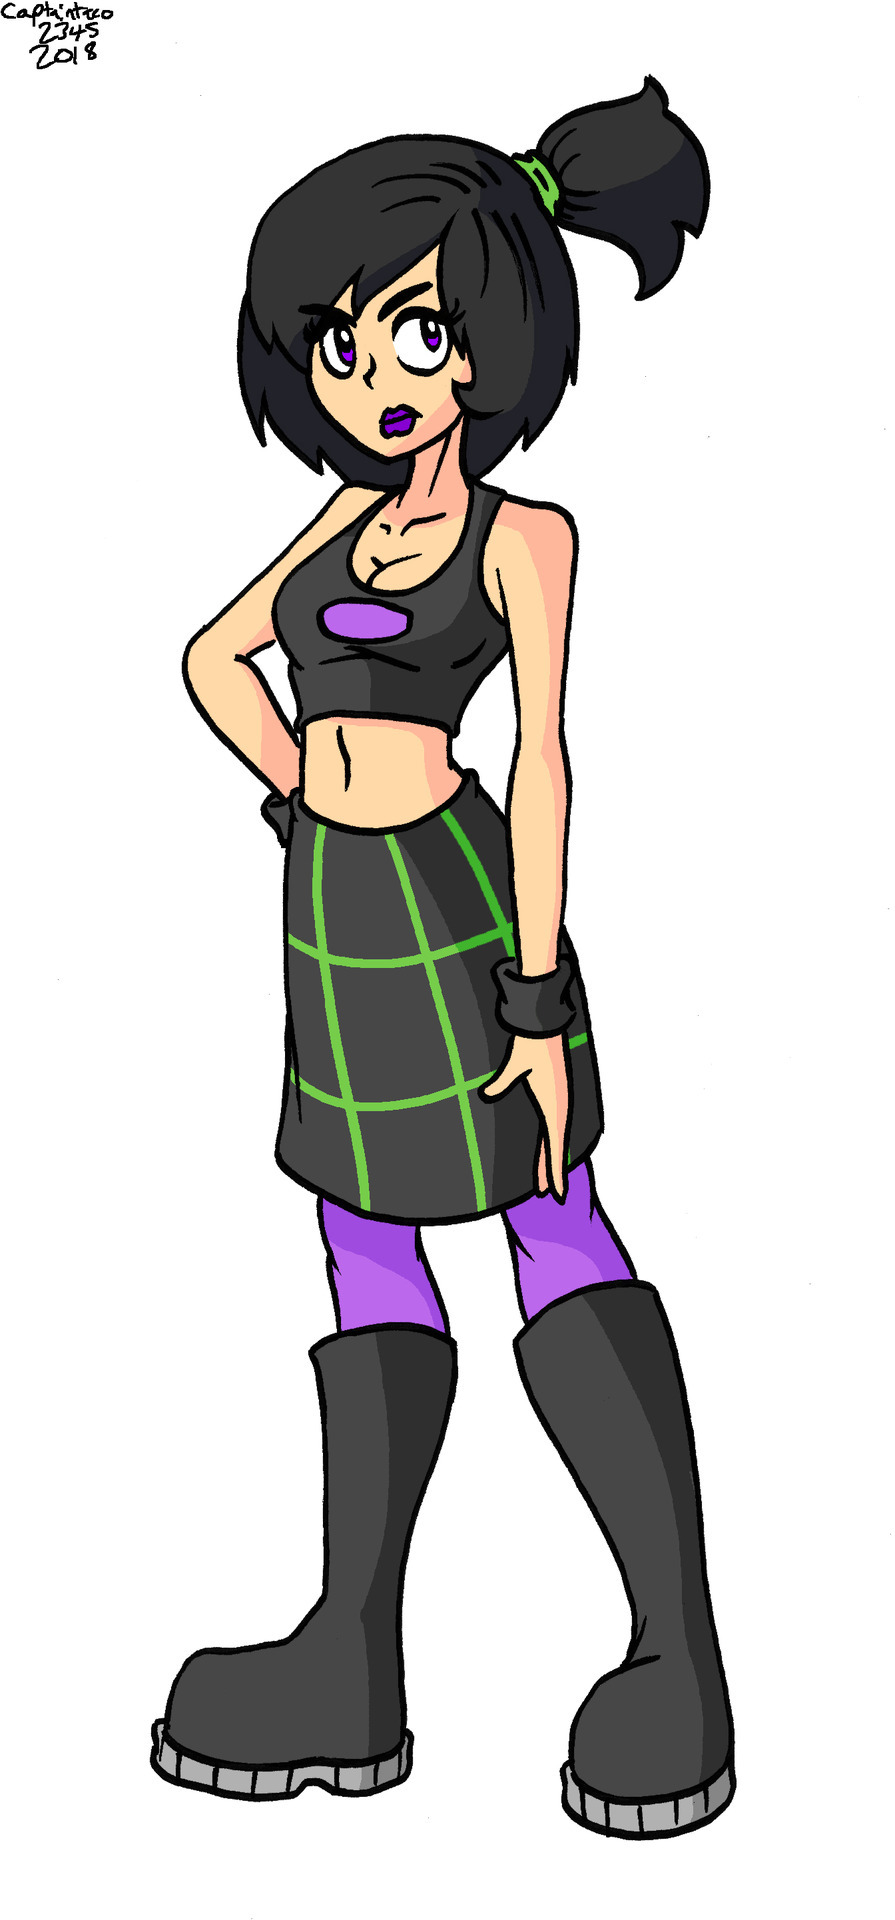 Sam Manson from Danny Phantom. Probably one of my first cartoon crushes. I actually